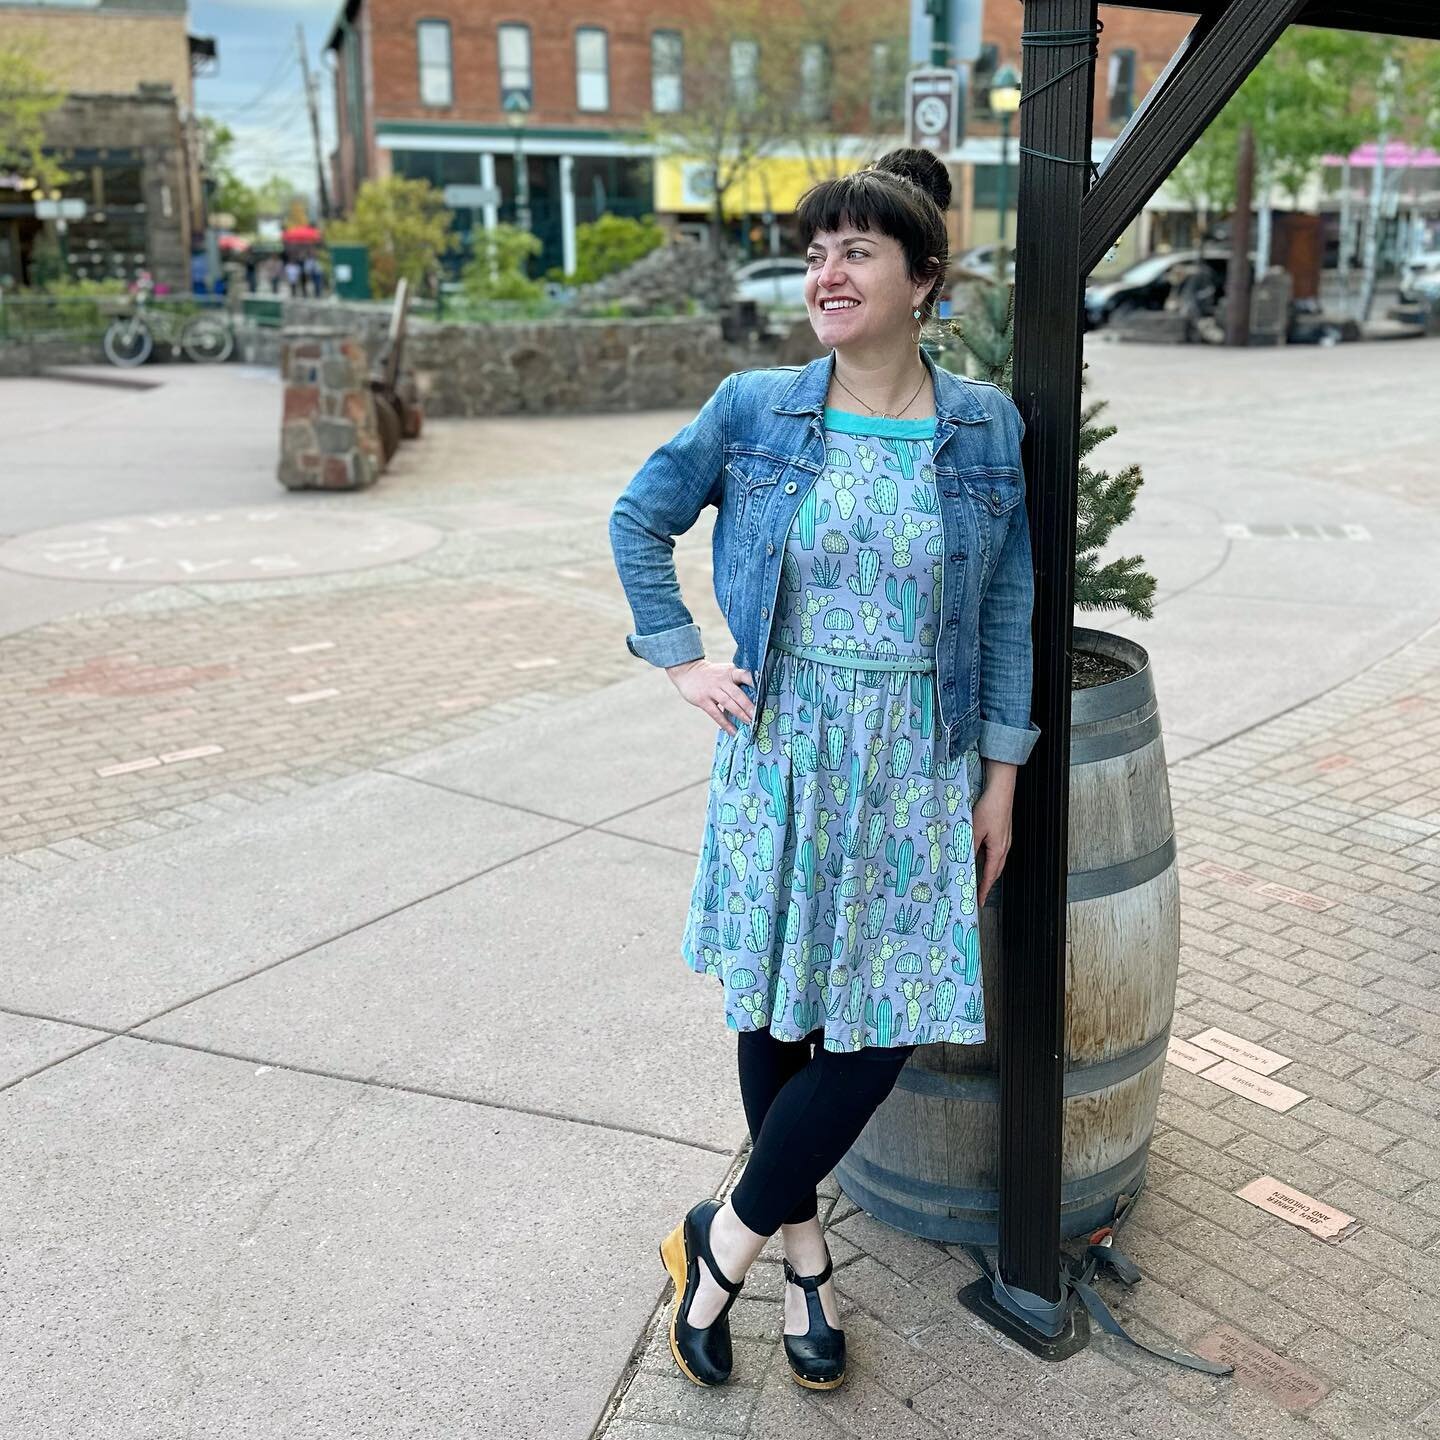 A little change of scenery for #MeMadeMay Day 15, a downtown Flagstaff date night. Wearing one of the first dresses I ever made, fabric from @spoonflower when they were doing the now-defunct #SproutPatterns (where they printed the fabric as pattern p